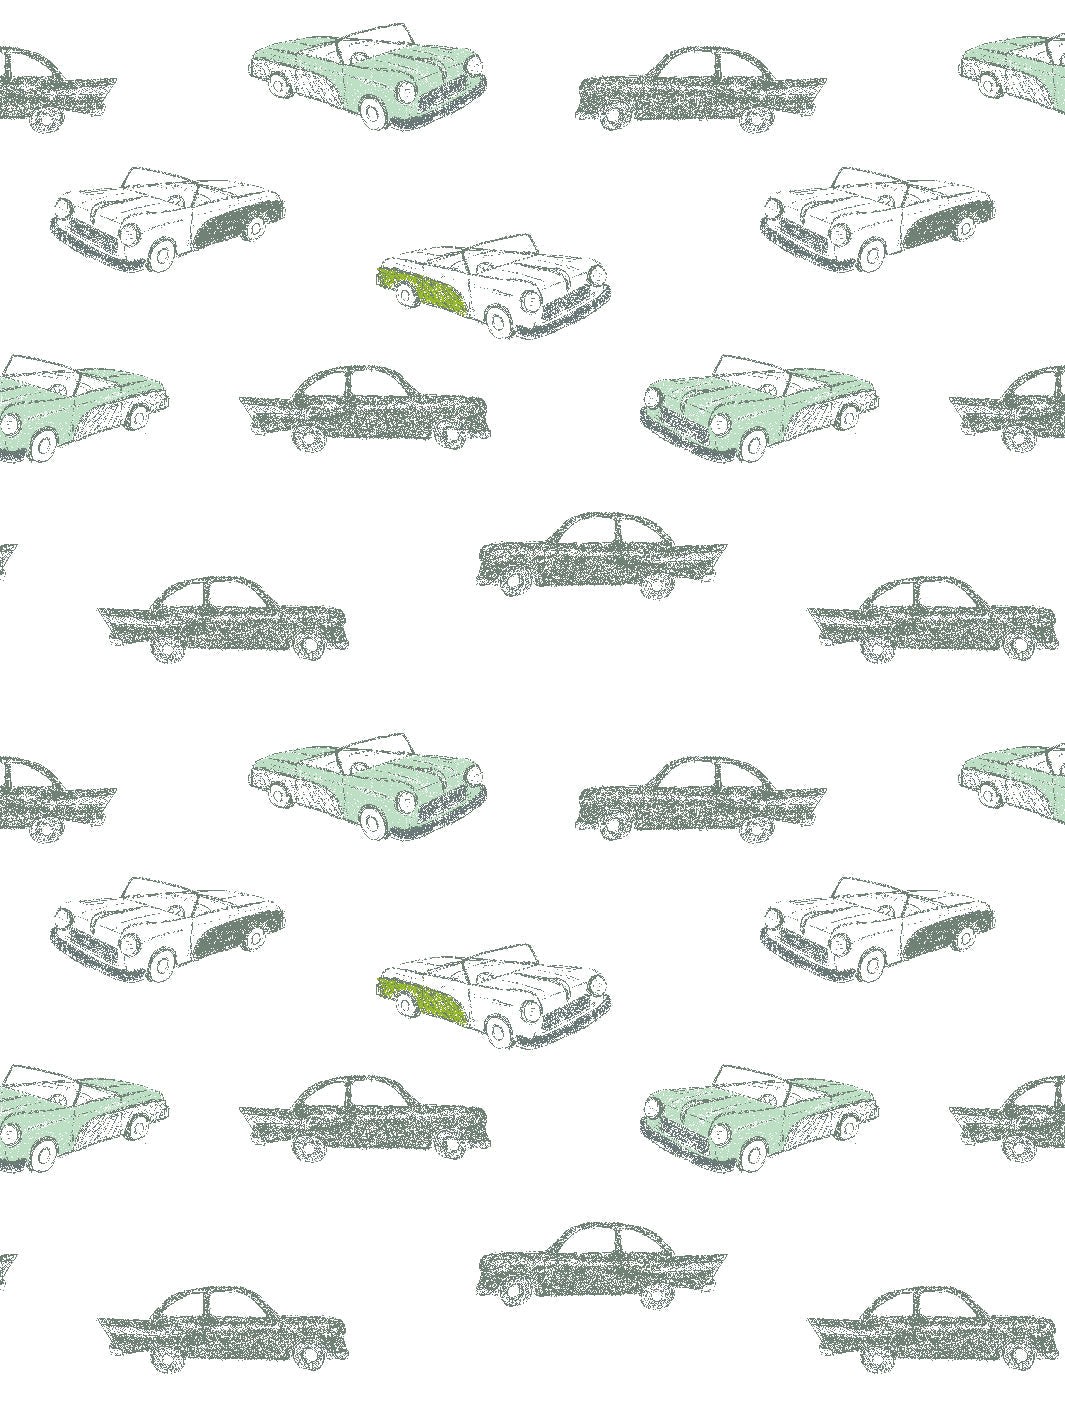 'Classic Cars' Wallpaper by Tea Collection - Aventurine